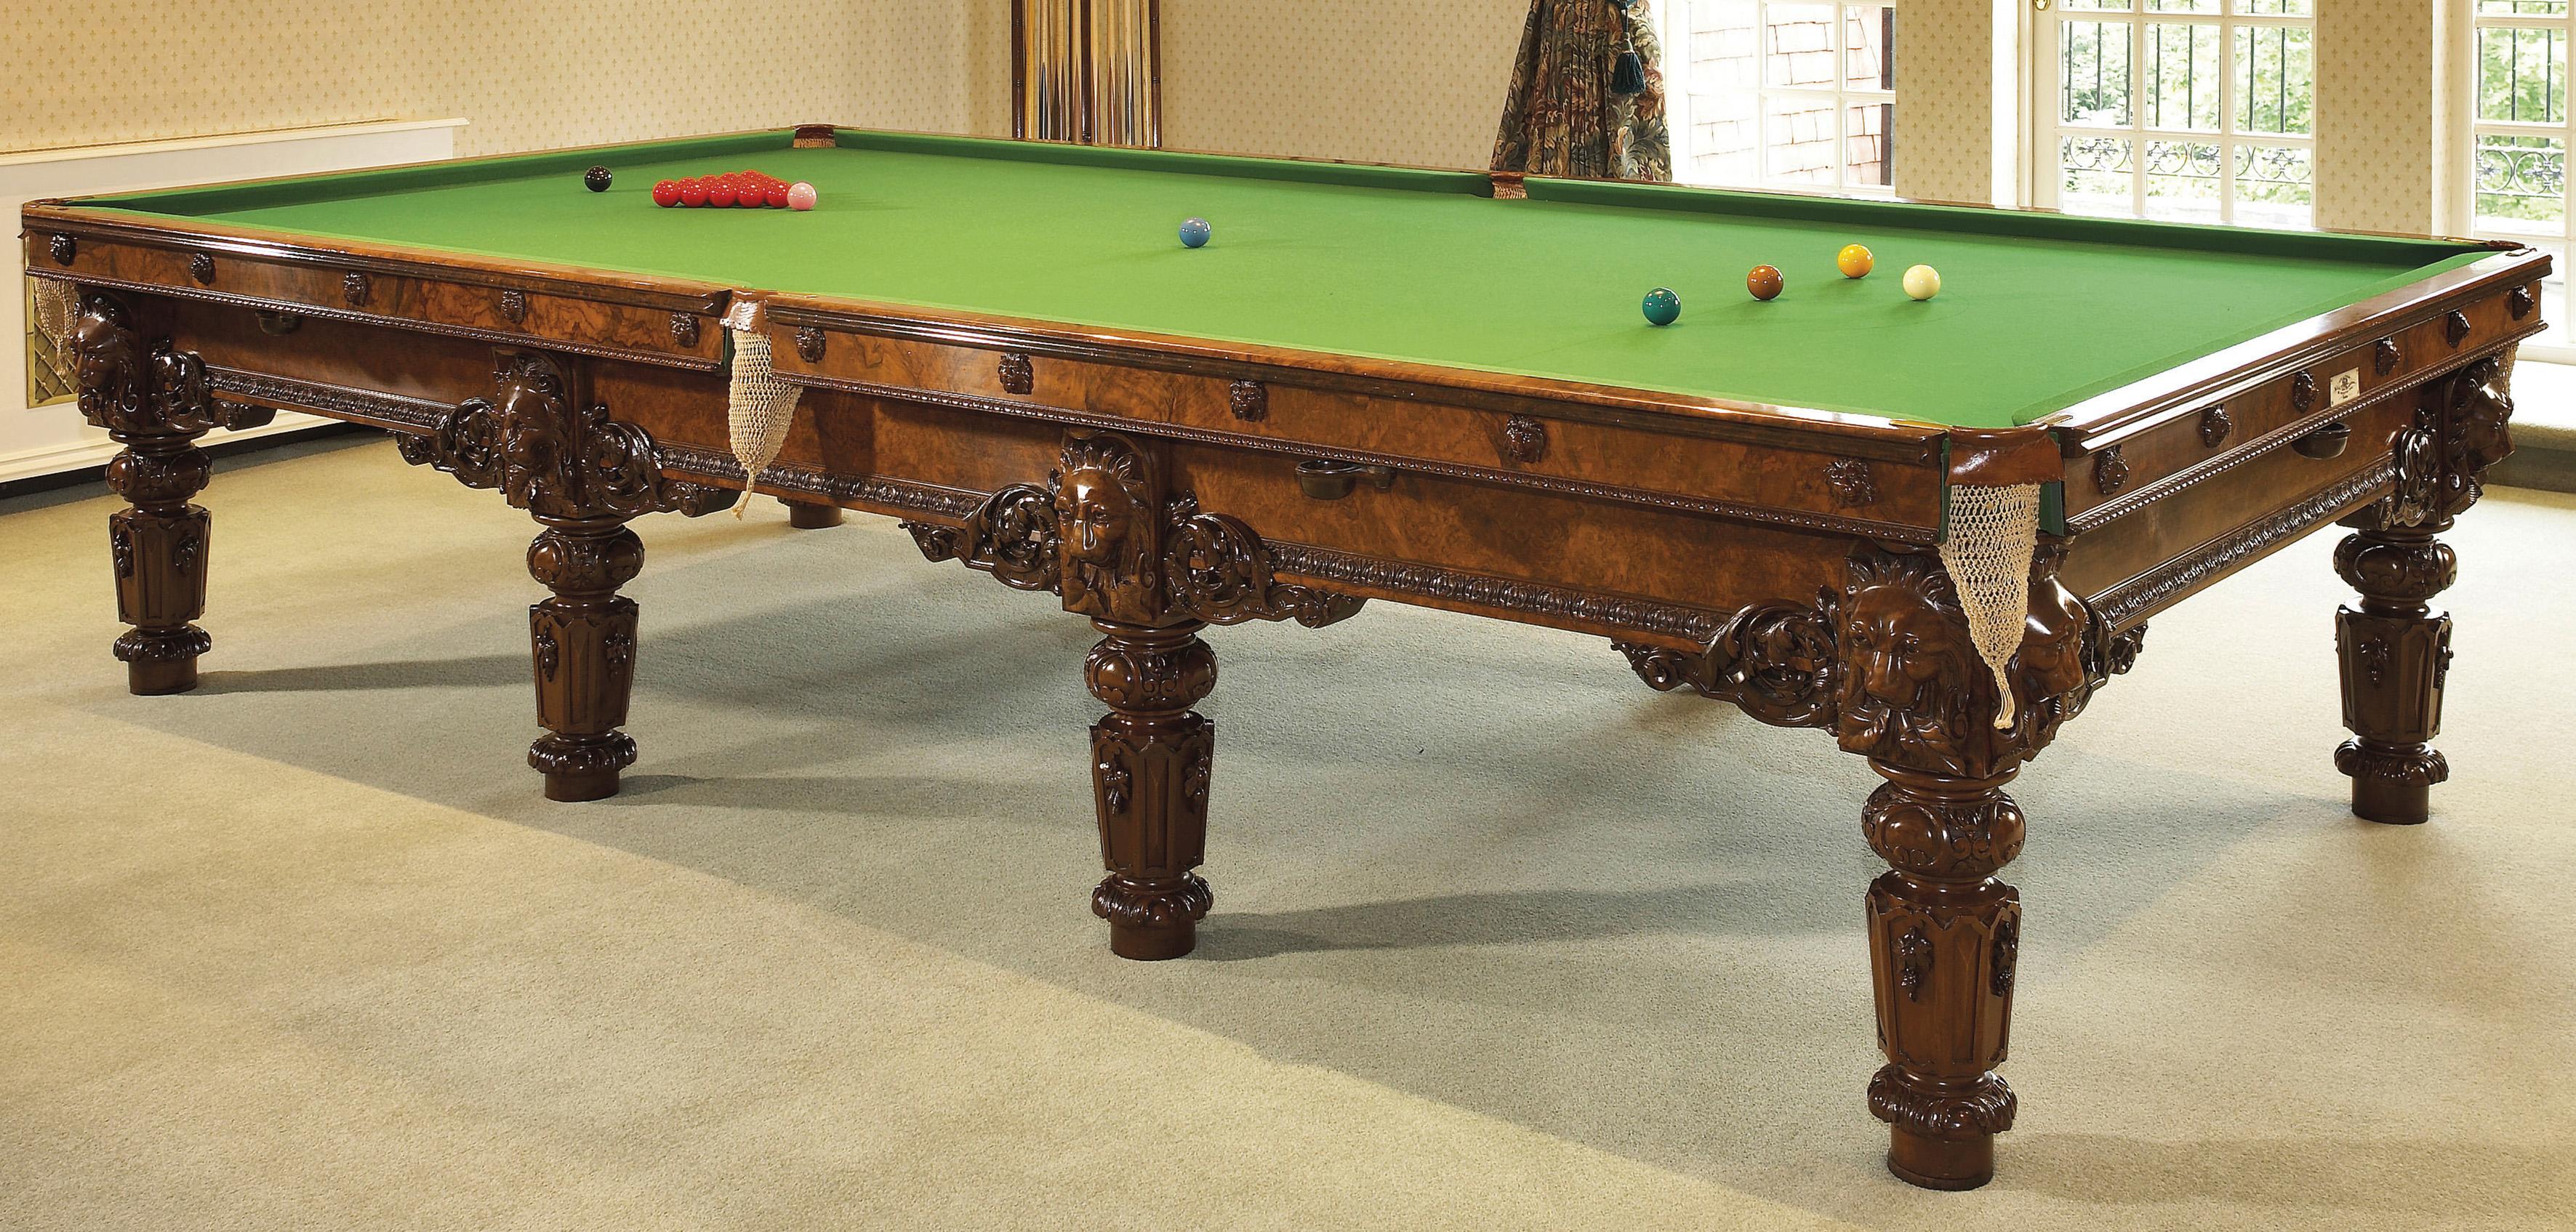 An exceptional carved walnut full size billiard table and accessories by Cox & Yeman.

London, circa 1880. 

One end bearing an ivorine label 'Cox & Yeman / Billiard Table Manufacturers / 184 BROMPTON ROAD, / London'. 

The Billiard table